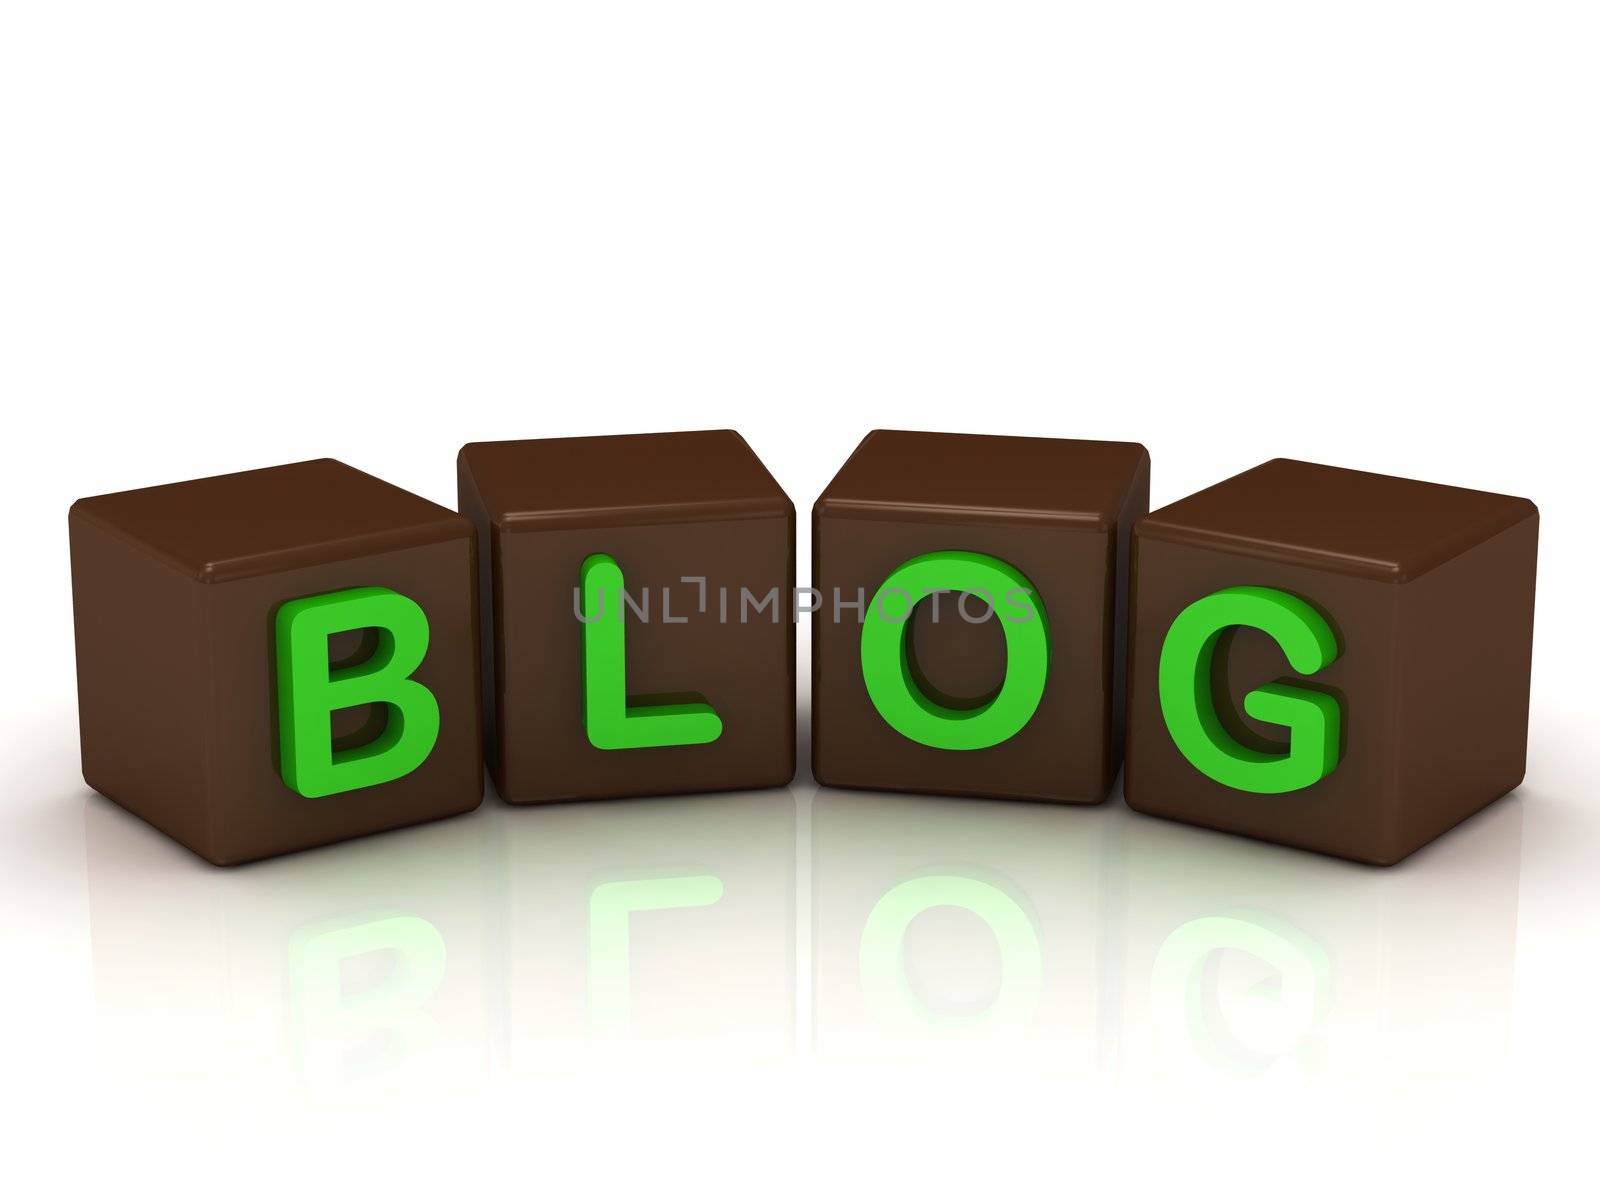 BLOG inscription bright green letters by GreenMost